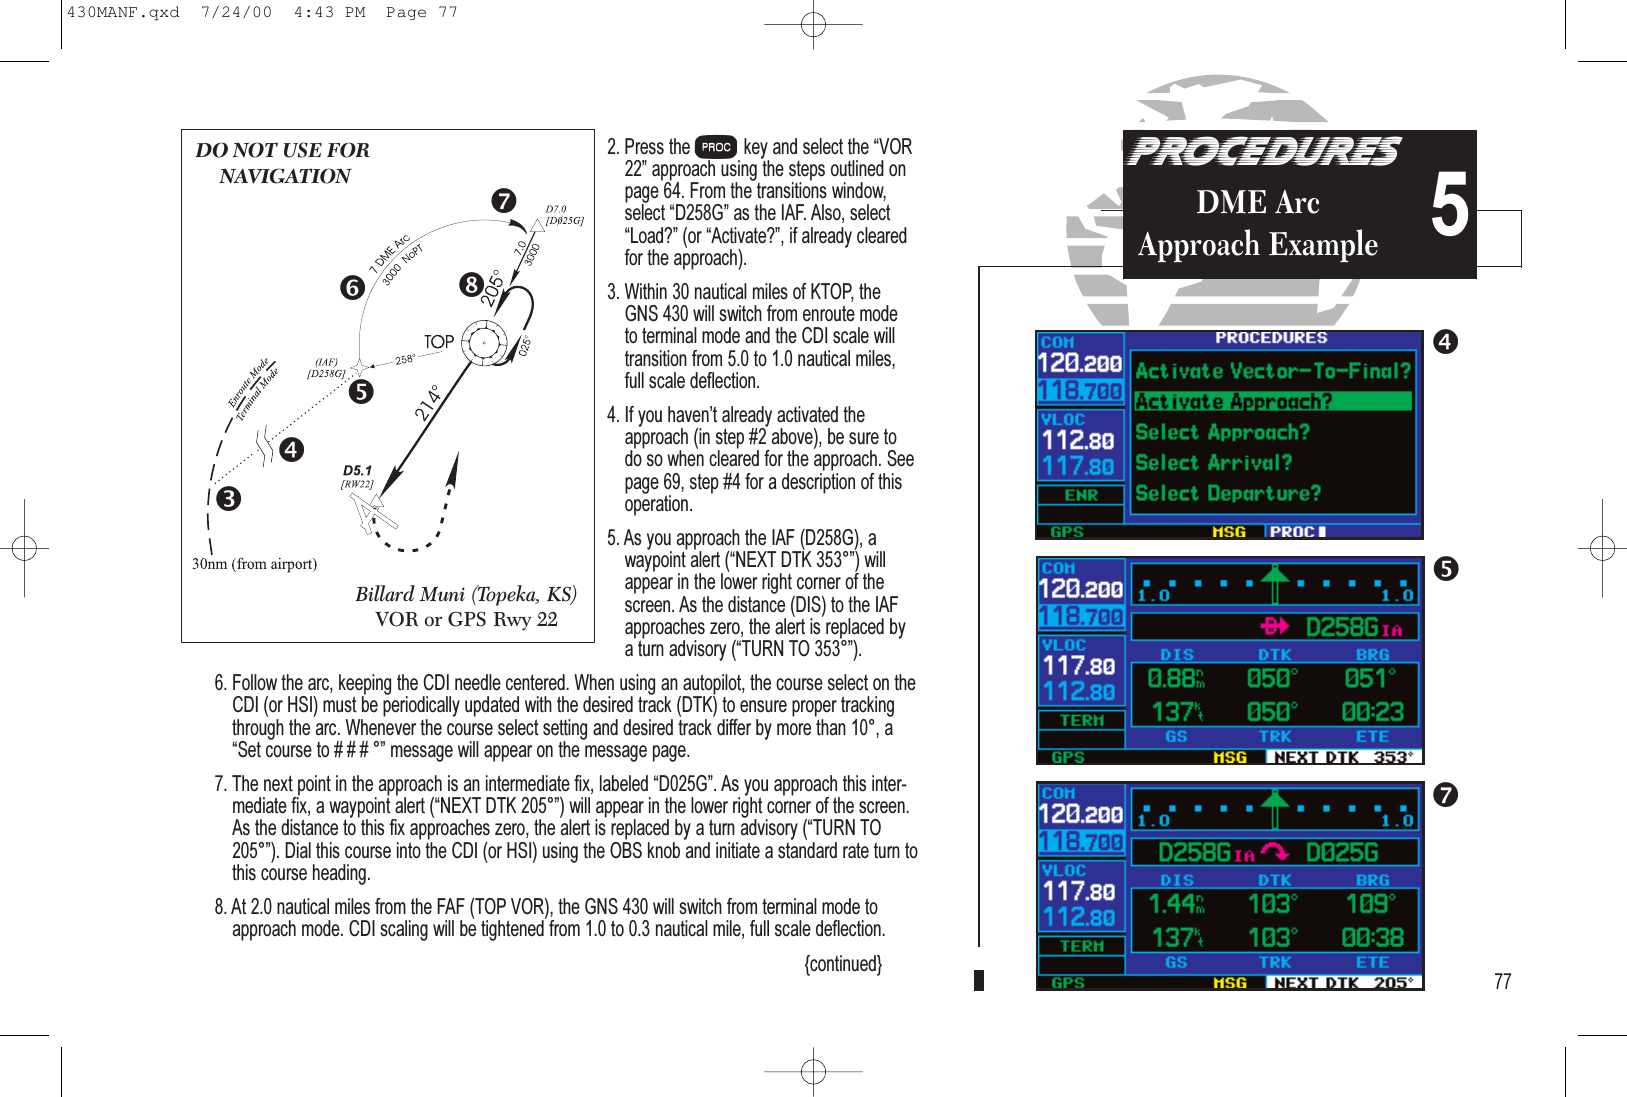 5PROCEDURESDME Arc Approach Example2. Press the Pkey and select the VOR22 approach using the steps outlined onpage 64. From the transitions window,select D258G as the IAF. Also, selectLoad? (or Activate?, if already clearedfor the approach).3. Within 30 nautical miles of KTOP, the GNS 430 will switch from enroute mode to terminal mode and the CDI scale willtransition from 5.0 to 1.0 nautical miles, full scale deflection.4. If you havent already activated theapproach (in step #2 above), be sure to do so when cleared for the approach. Seepage 69, step #4 for a description of thisoperation.5. As you approach the IAF (D258G), a waypoint alert (NEXT DTK 353°) willappear in the lower right corner of thescreen. As the distance (DIS) to the IAFapproaches zero, the alert is replaced by a turn advisory (TURN TO 353°).6. Follow the arc, keeping the CDI needle centered. When using an autopilot, the course select on theCDI (or HSI) must be periodically updated with the desired track (DTK) to ensure proper trackingthrough the arc. Whenever the course select setting and desired track differ by more than 10°, aSet course to # # # ° message will appear on the message page.7. The next point in the approach is an intermediate fix, labeled D025G. As you approach this inter-mediate fix, a waypoint alert (NEXT DTK 205°) will appear in the lower right corner of the screen.As the distance to this fix approaches zero, the alert is replaced by a turn advisory (TURN TO205°). Dial this course into the CDI (or HSI) using the OBS knob and initiate a standard rate turn tothis course heading.8. At 2.0 nautical miles from the FAF (TOP VOR), the GNS 430 will switch from terminal mode toapproach mode. CDI scaling will be tightened from 1.0 to 0.3 nautical mile, full scale deflection.{continued} 77DO NOT USE FORNAVIGATIONBillard Muni (Topeka, KS)VOR or GPS Rwy 22430MANF.qxd  7/24/00  4:43 PM  Page 77